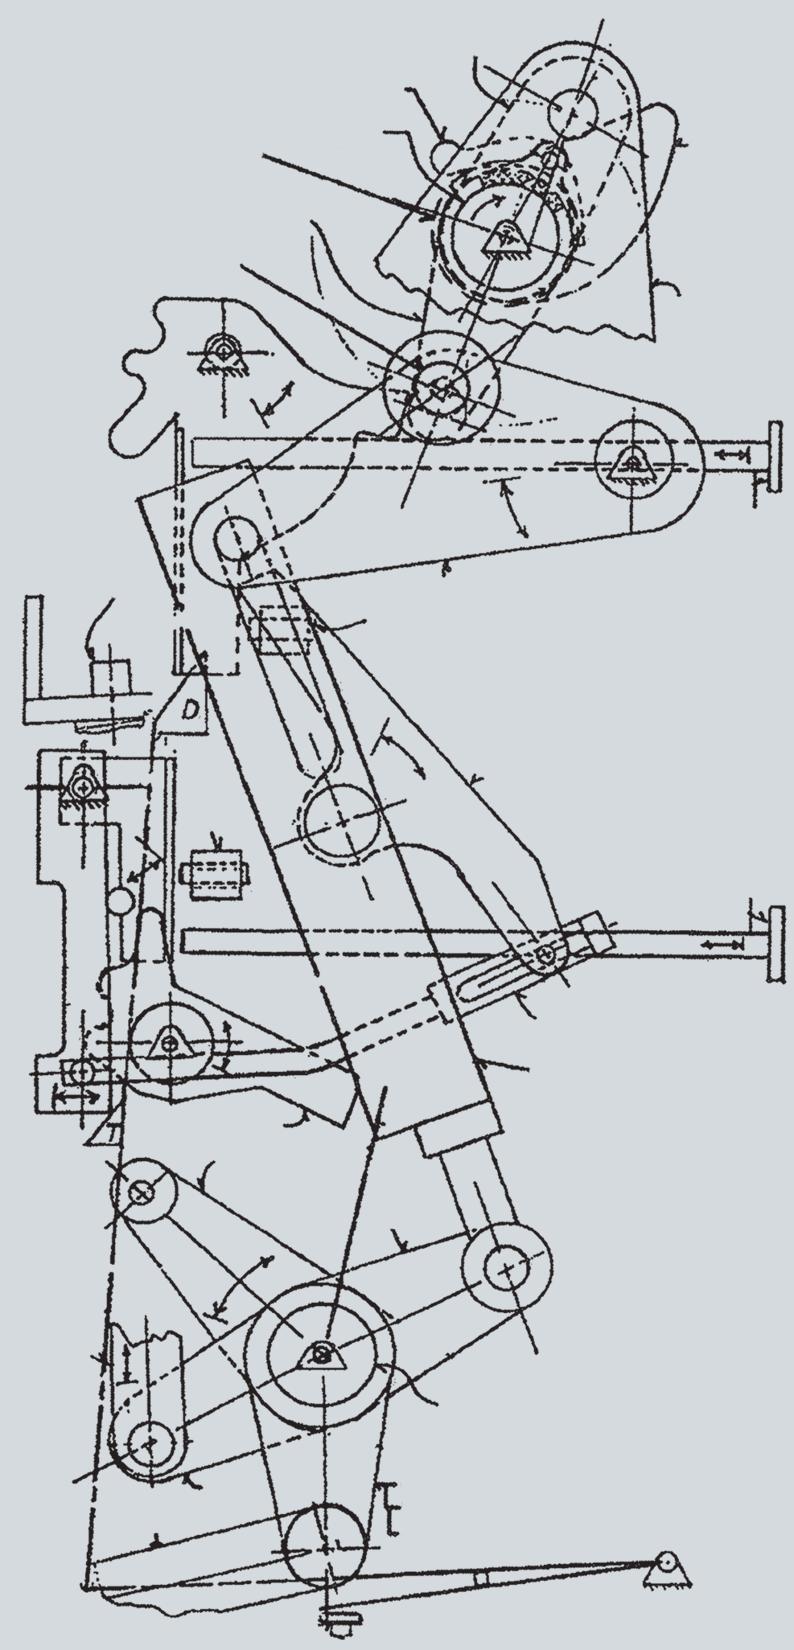 Vacuum interrupter/ operator Figure 18: Operating mechanism section diagram (drawout trip-free linkage shown) mechanism OPEN, closing spring DISCHARGED. 48.0 - Insulating coupler 50.